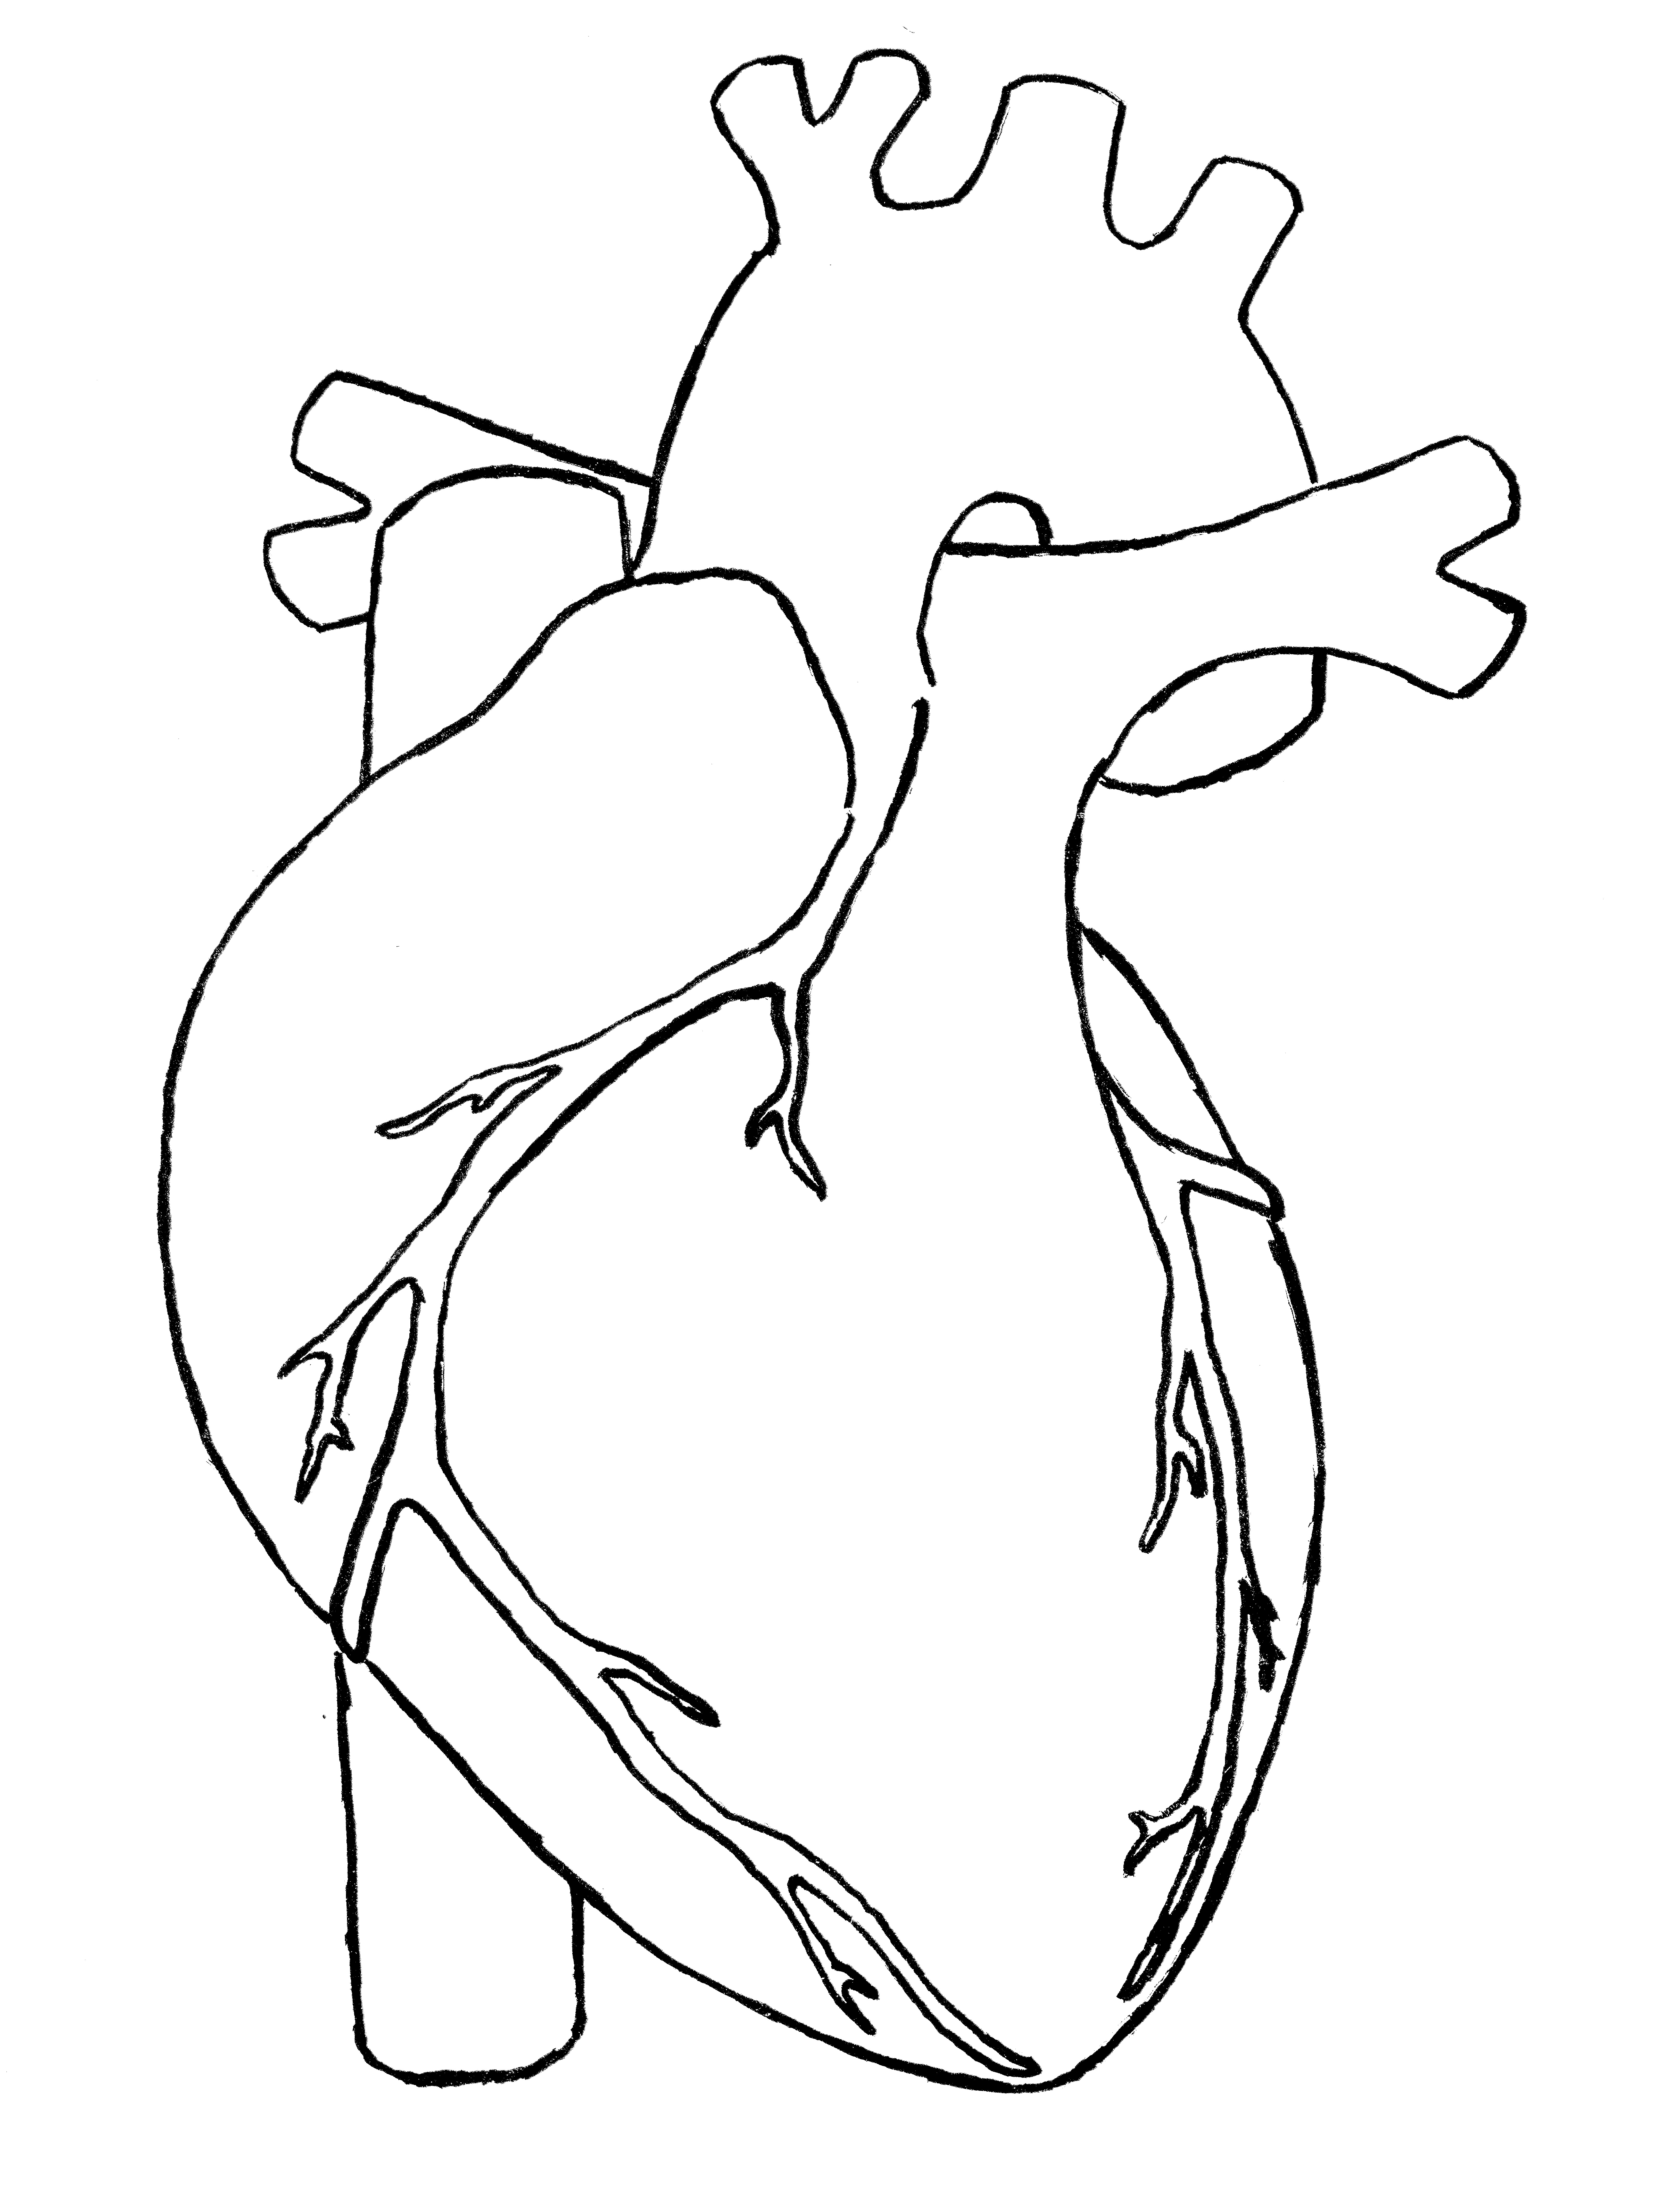 Simple Heart Drawing - Cliparts.co